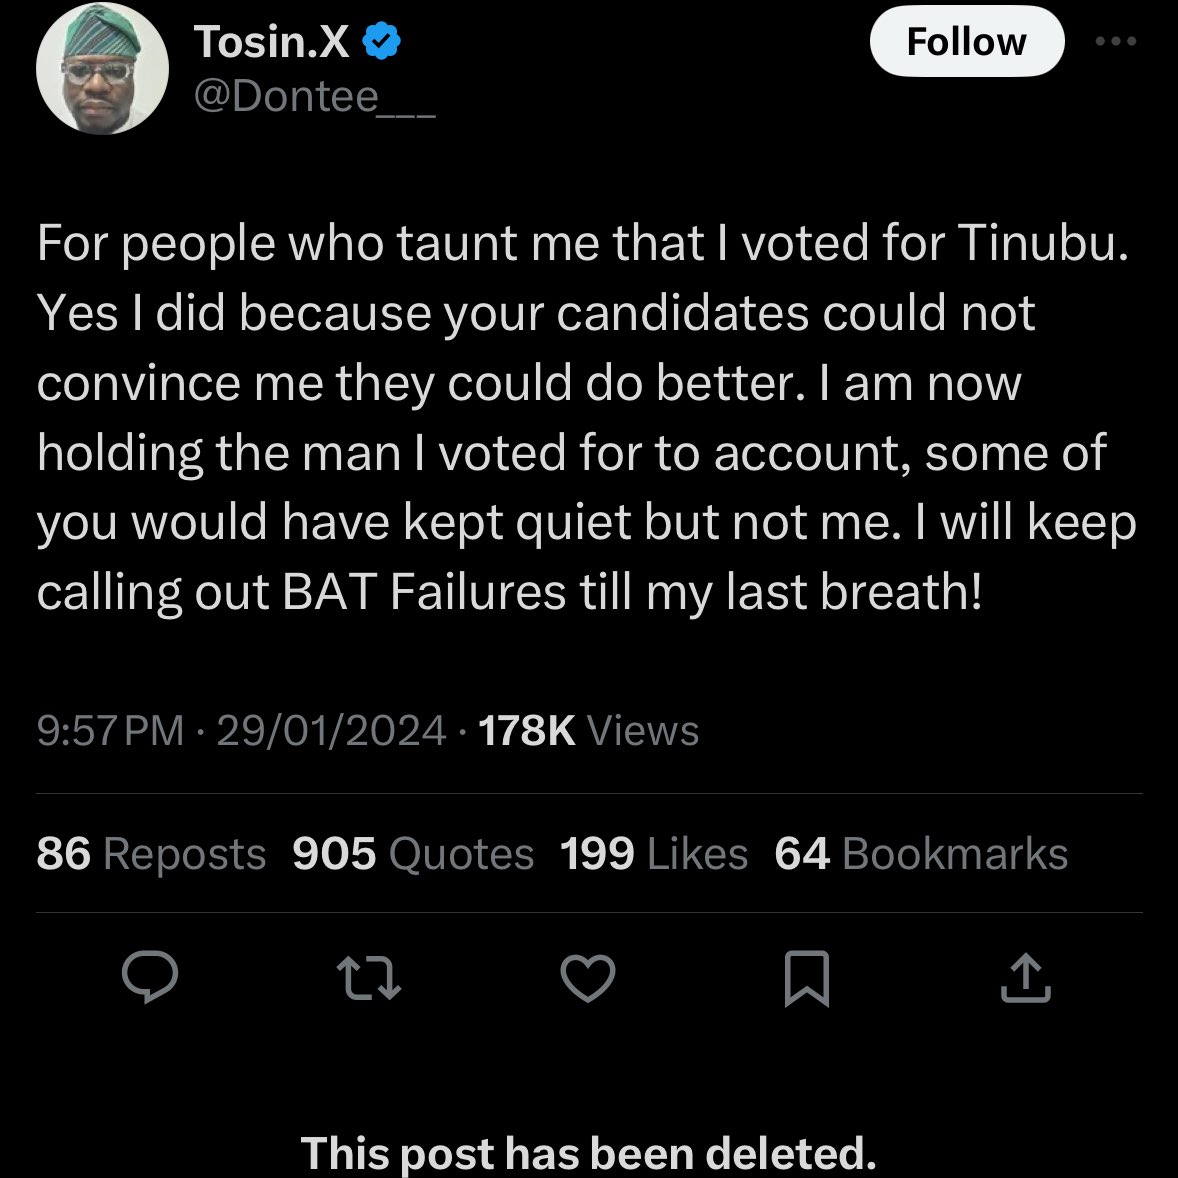 If Tinubu of all candidates is who convinced you, it clearly speaks a lot about your IQ.

APC fans are generally dumb anyways.